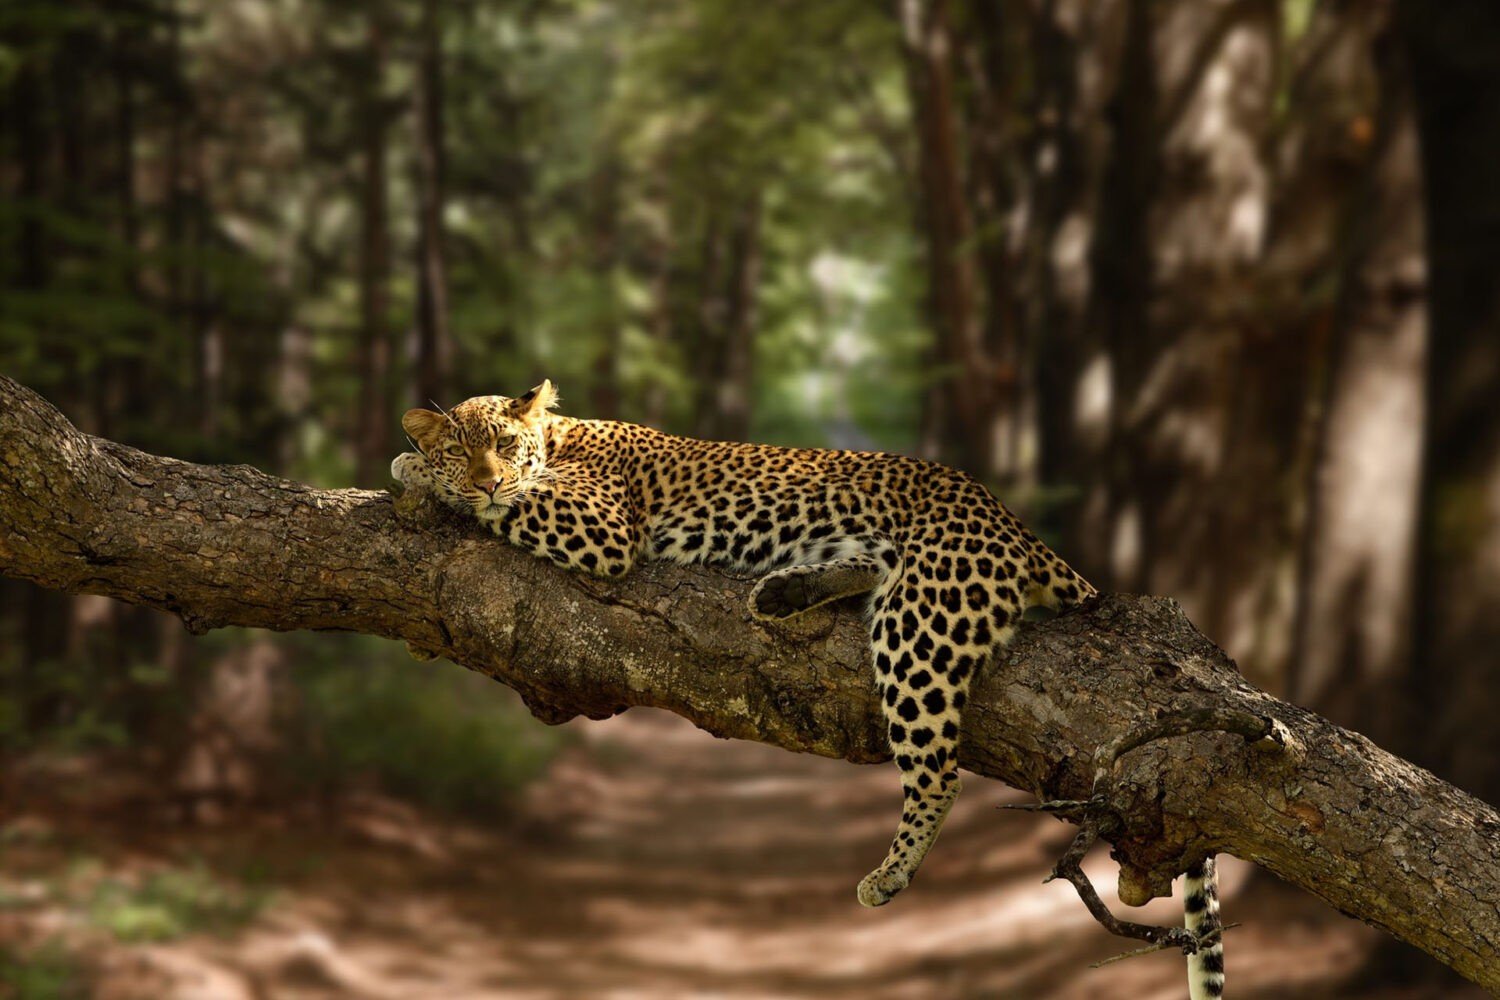 A leopard is sleeping on a branch of a tree in the Serengeti National Park in Tanzania. The leopard is a large, spotted cat with a long tail. It is resting its head on its paws and its eyes are closed. The leopard is in a peaceful sleep, unaware of the beauty of the surrounding savanna.